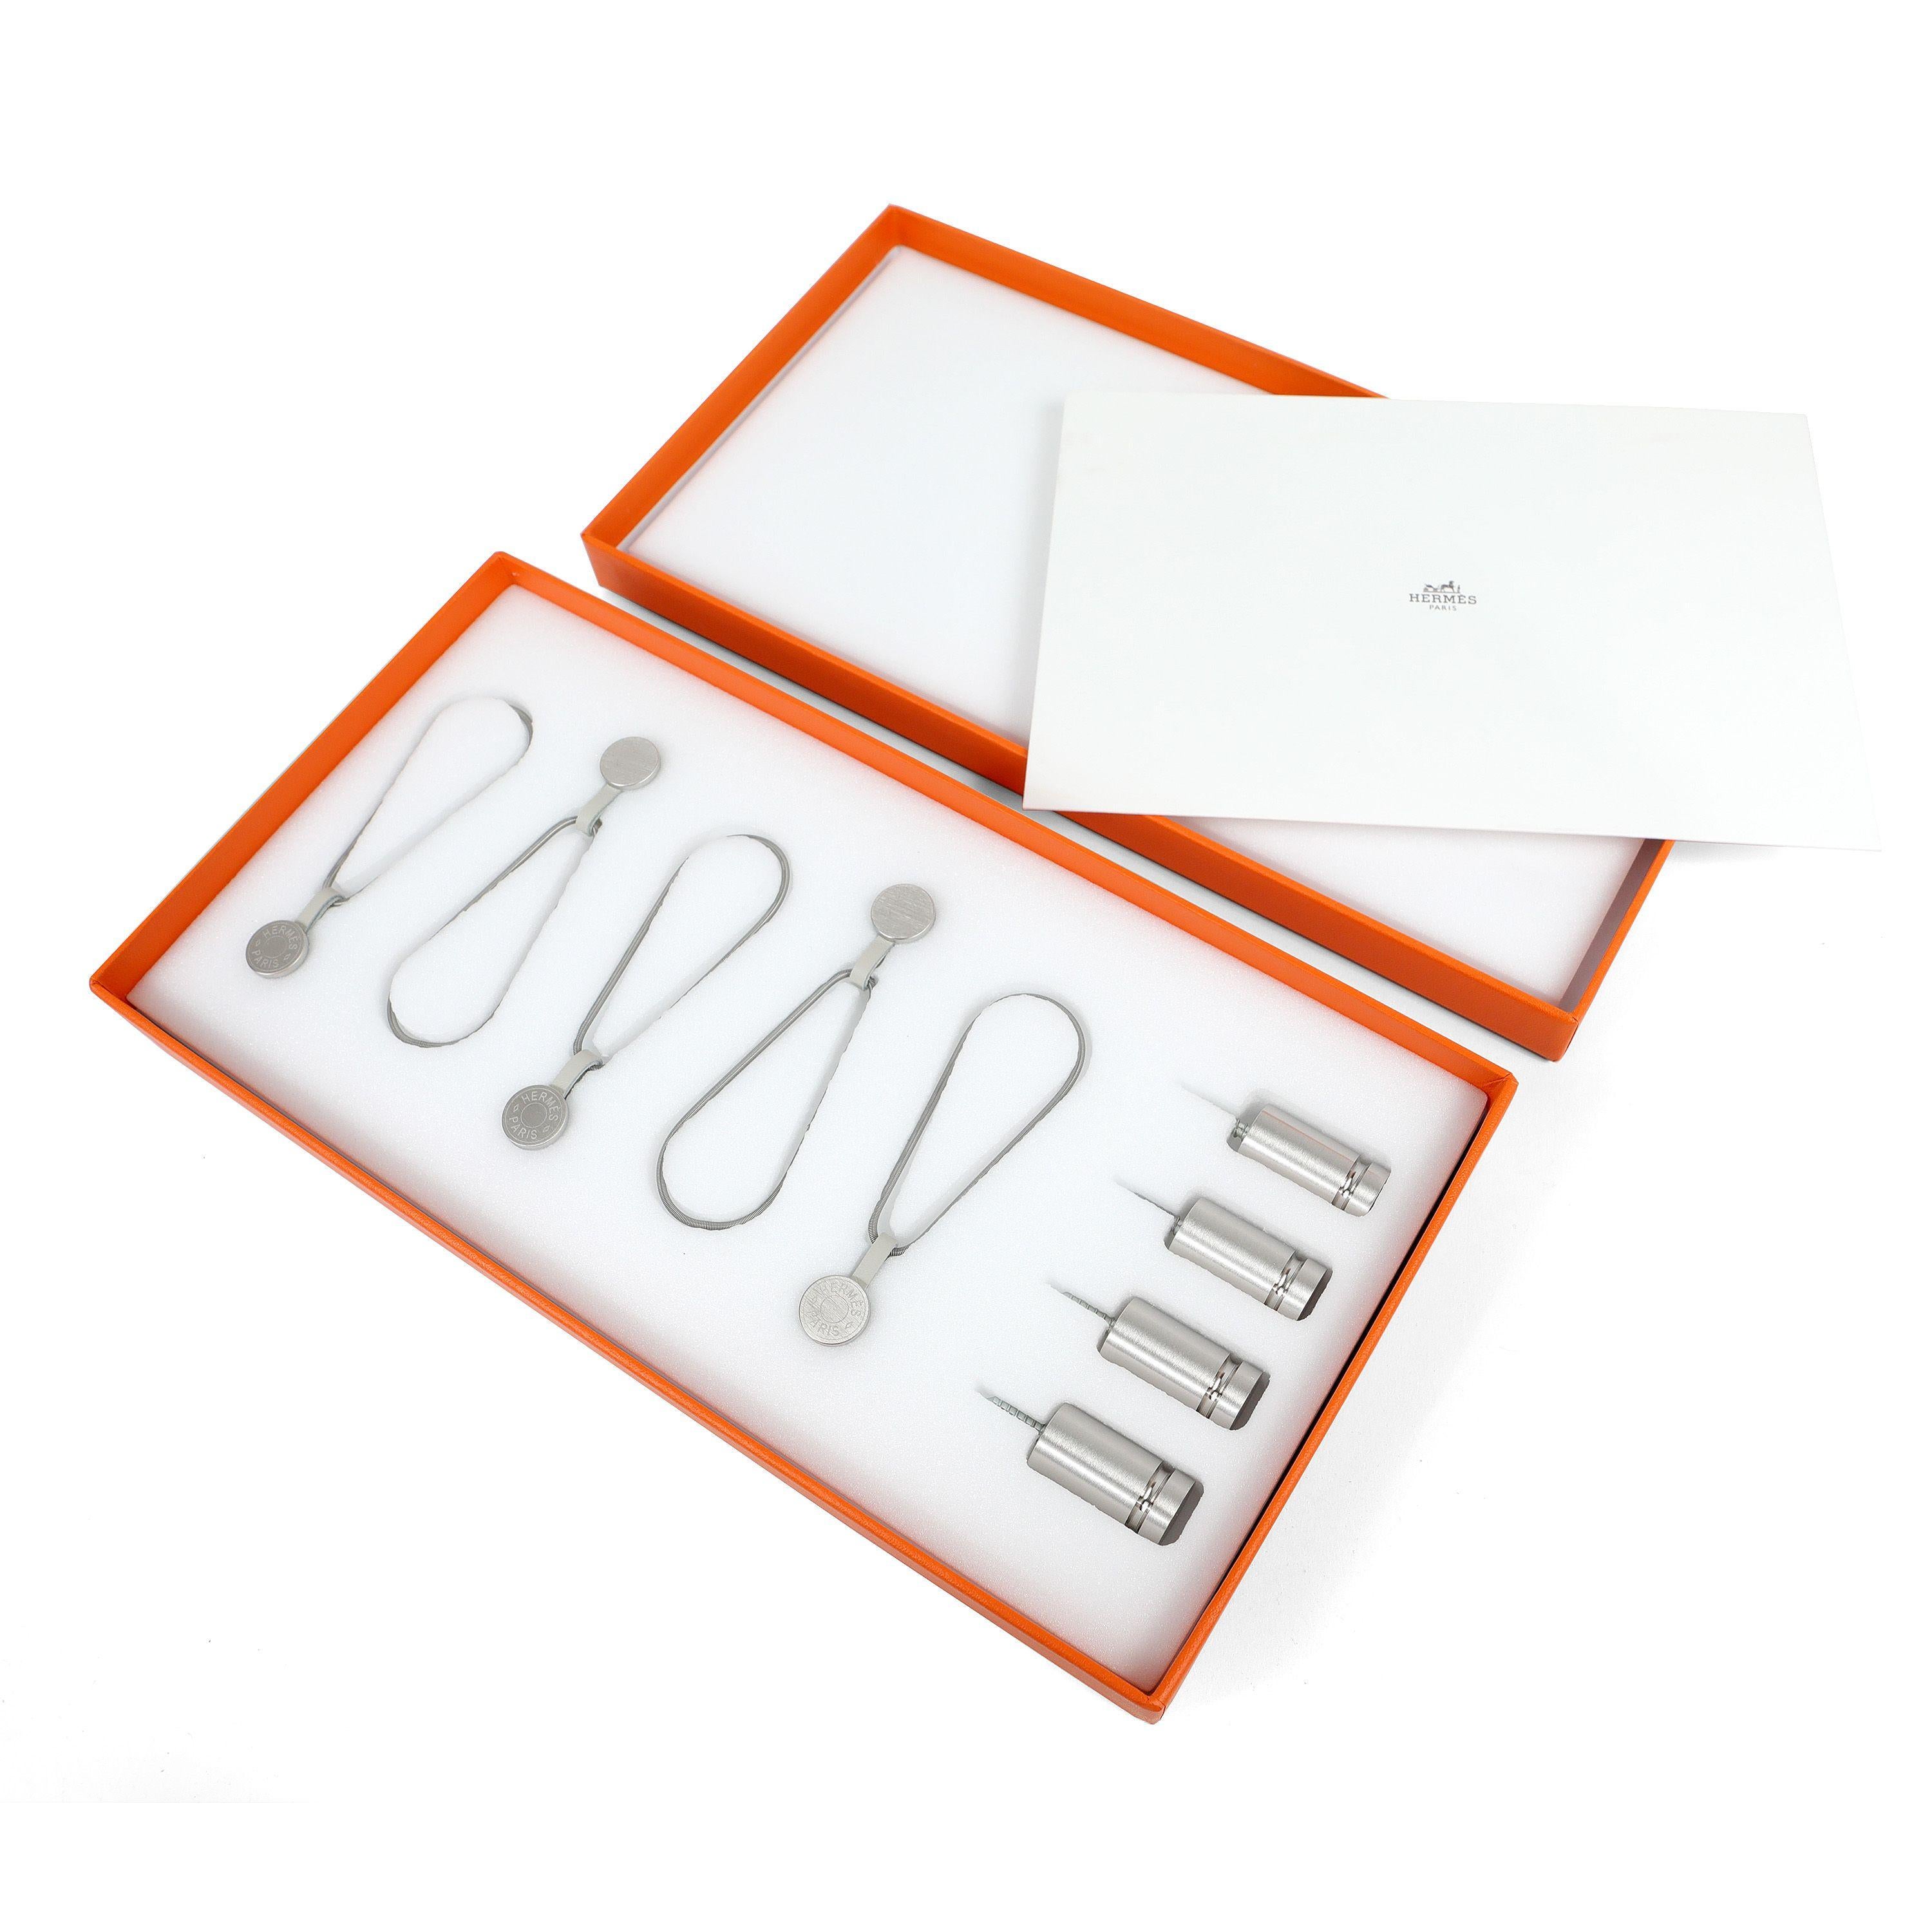 This authentic Hermès Scarf Display System is brand new in the box.  Designed specifically for silk scarves.  Set includes magnets, screws and cables.  Box included.

PBF 13983
